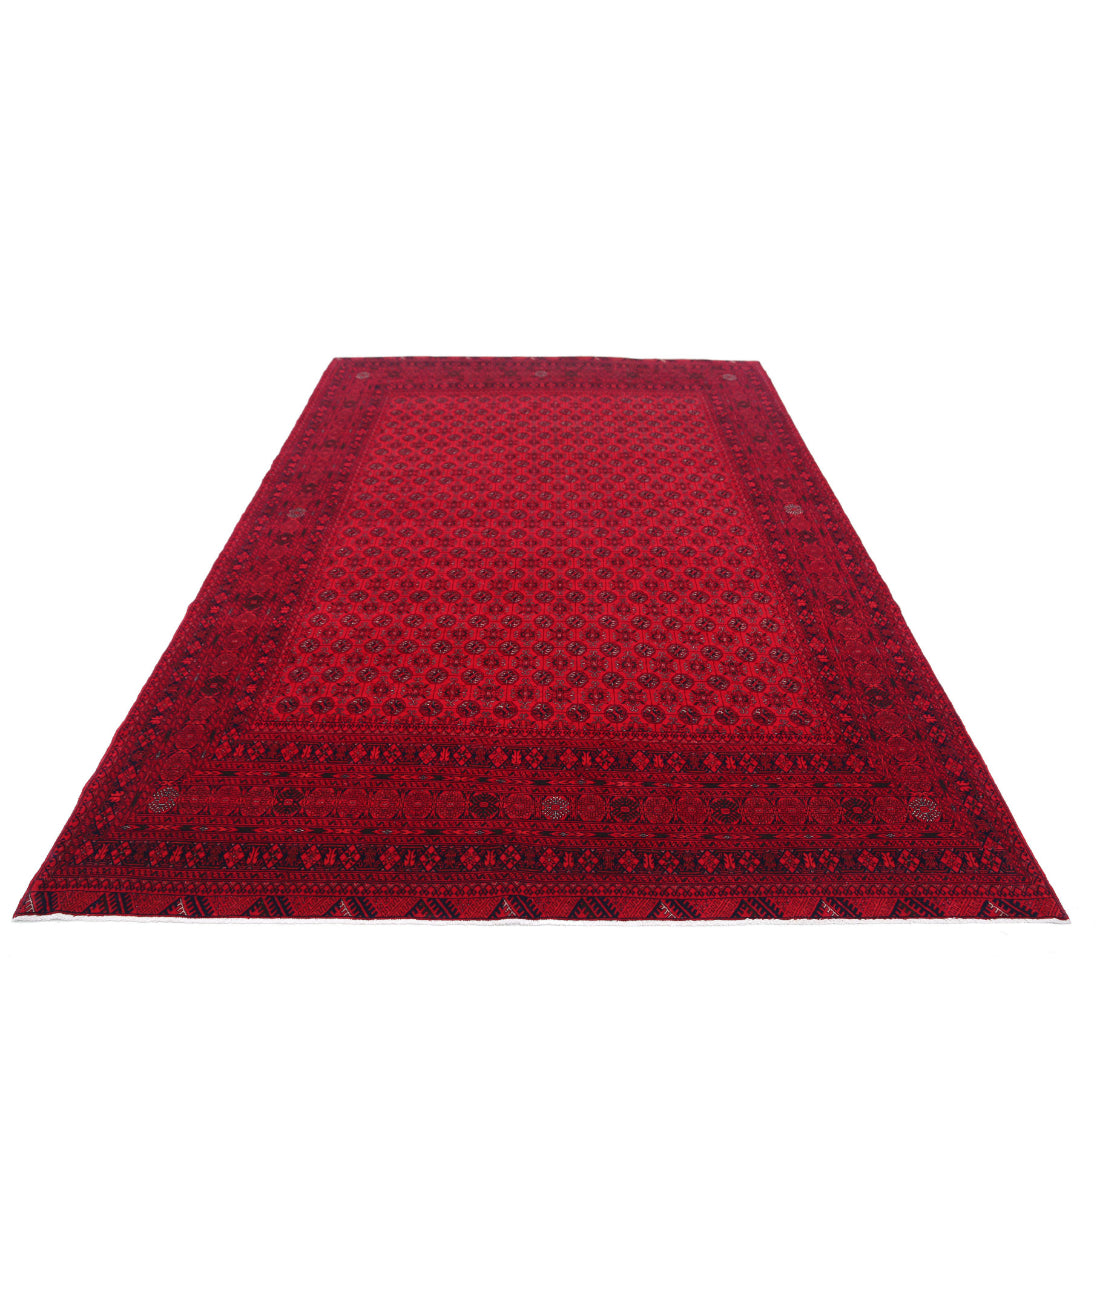 Hand Knotted Afghan Beljik Wool Rug - 6'6'' x 9'6'' 6'6'' x 9'6'' (195 X 285) / Red / Red